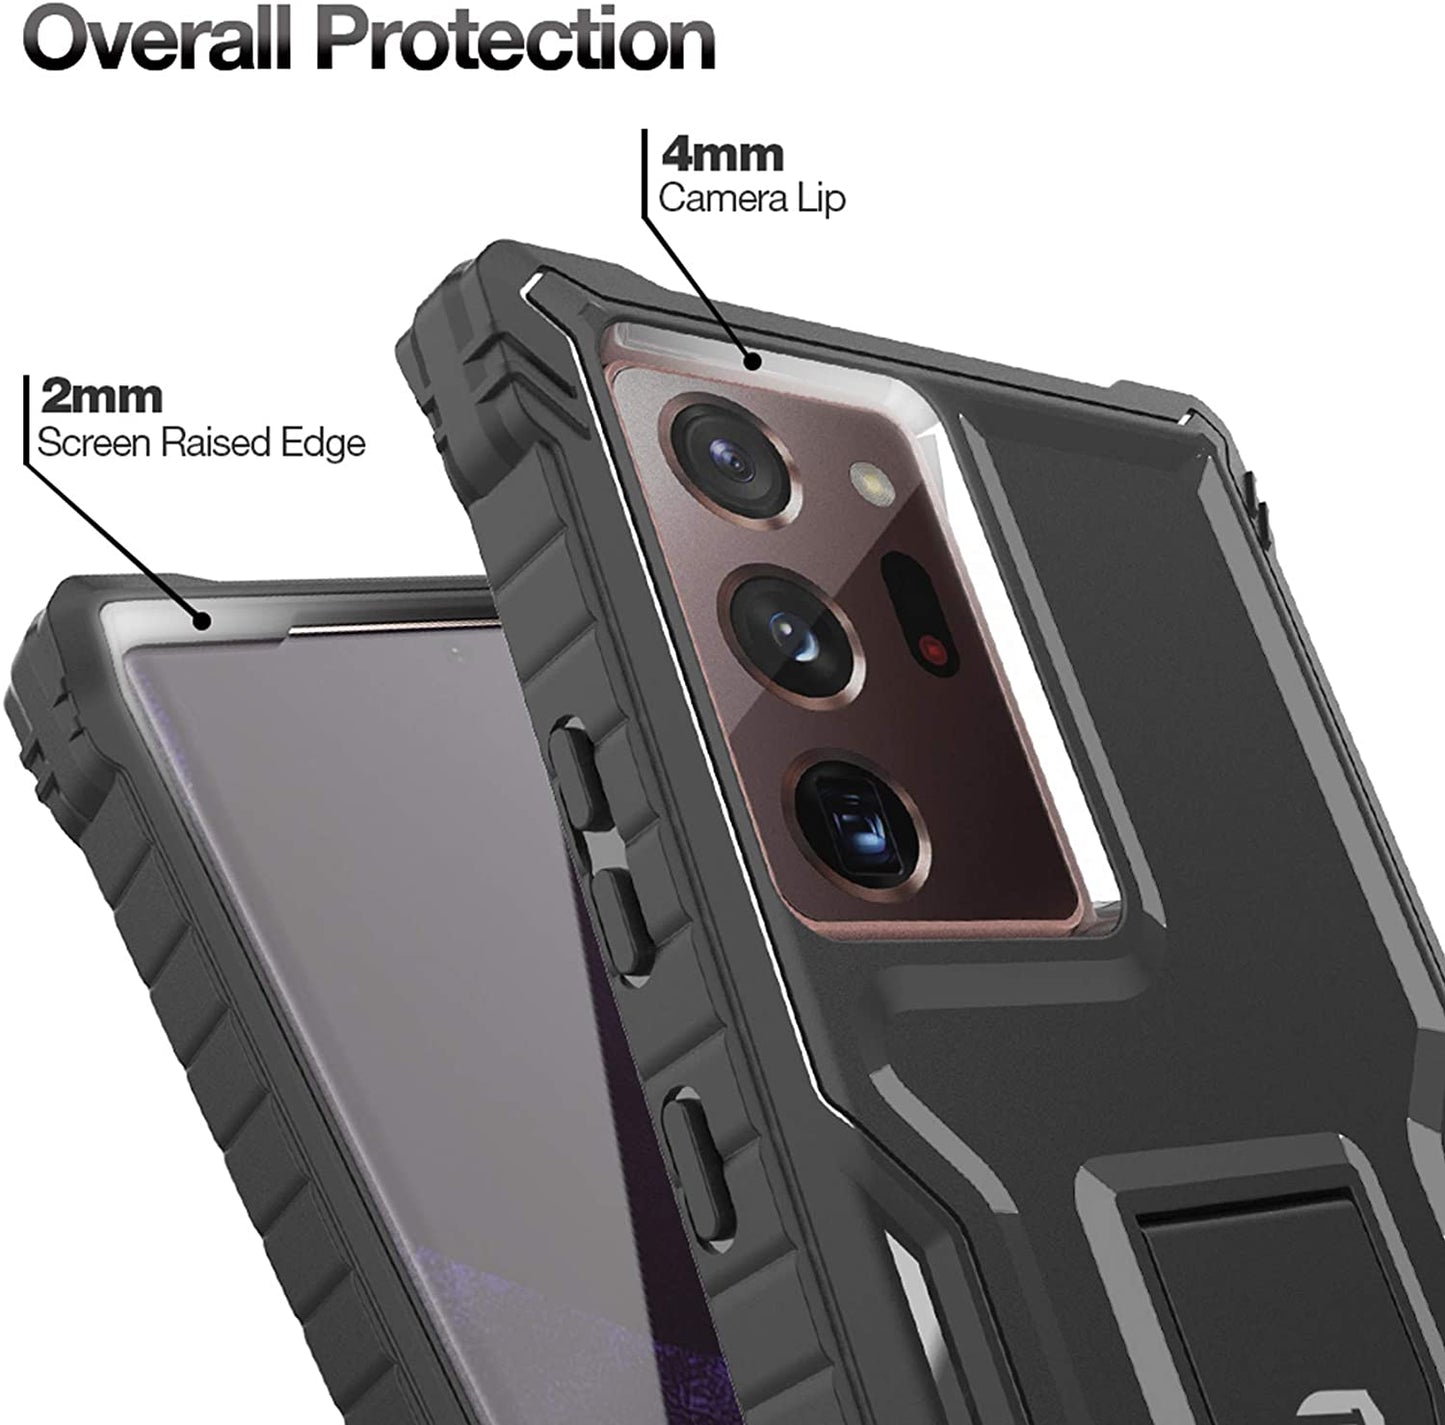 FITO Samsung Galaxy Note 20 Ultra Case, Dual Layer Shockproof Heavy Duty Case for Samsung Note 20 Ultra 5G Phone Without Screen Protector, Built-in Kickstand